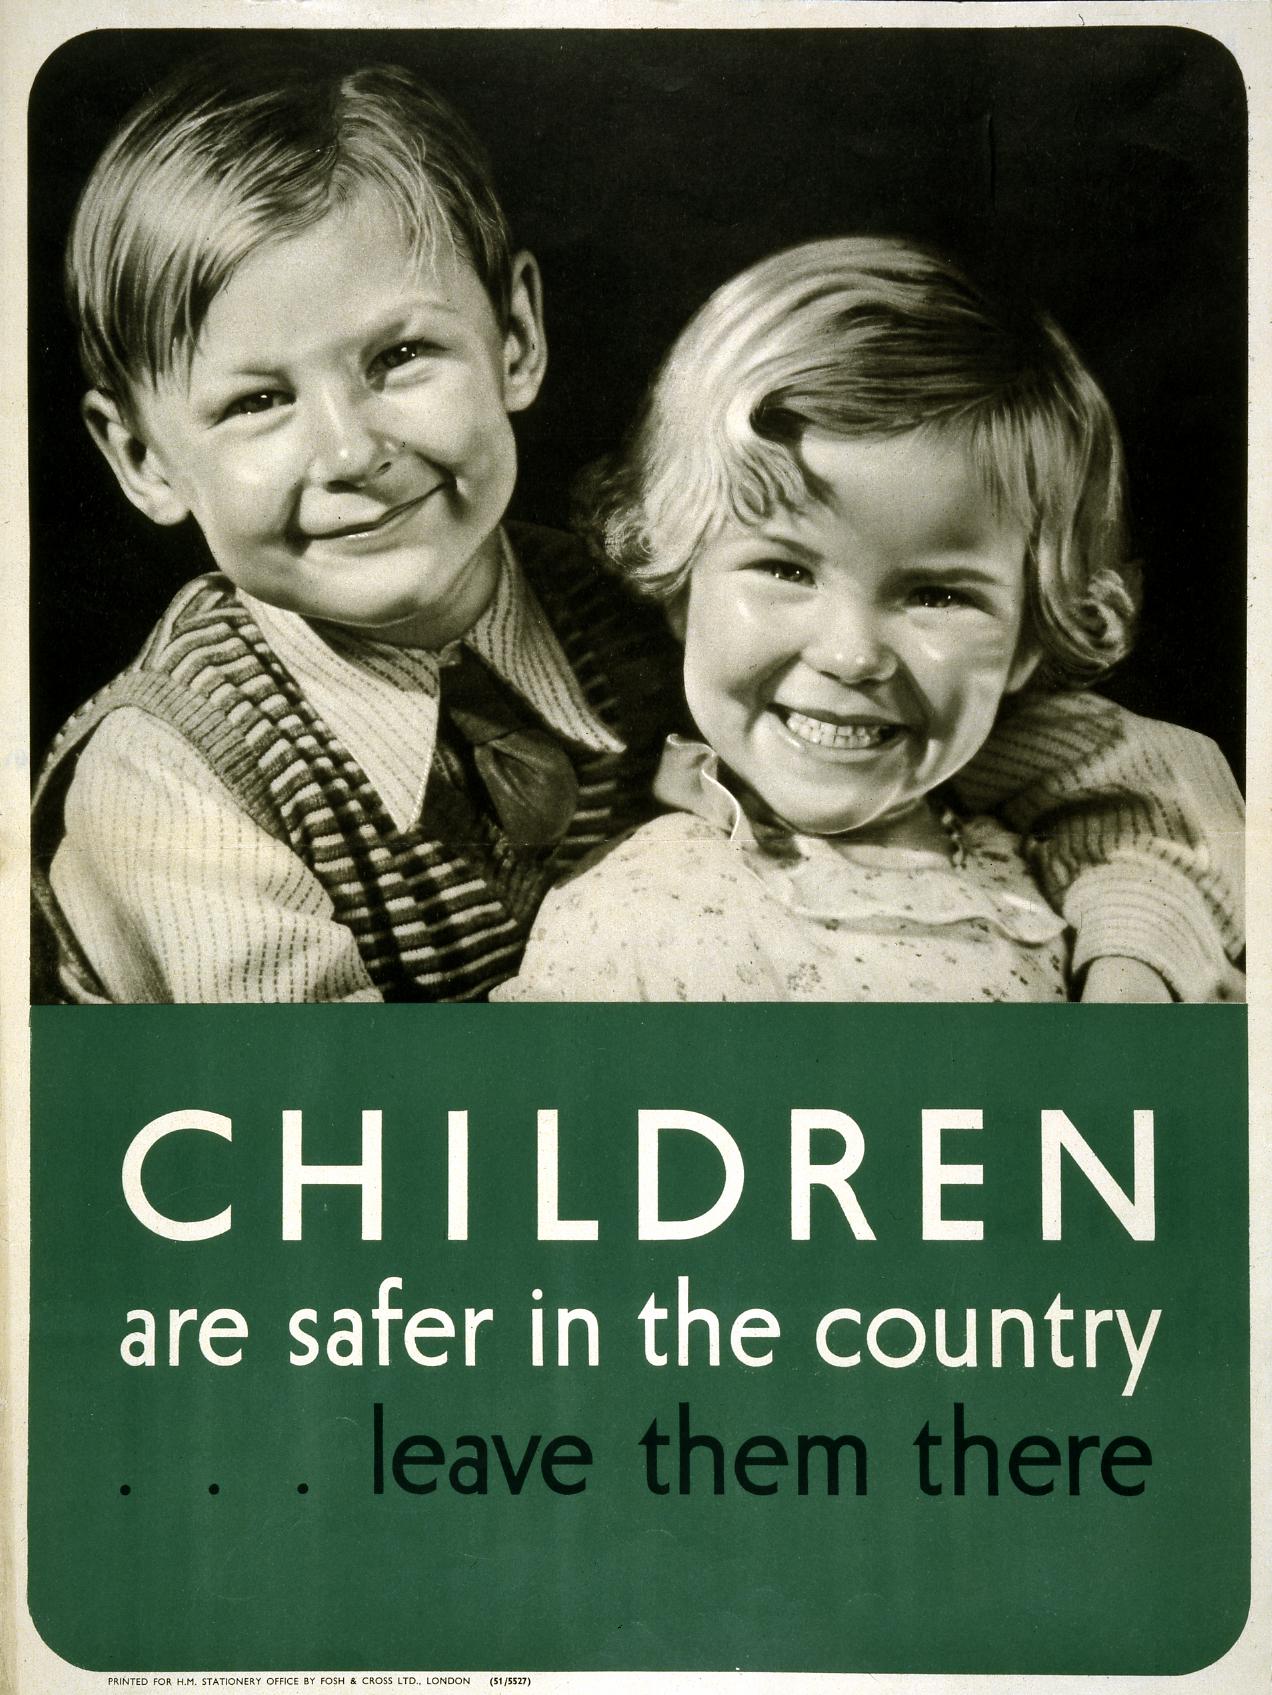 Poster featuring a monochrome image of two smiling young children.